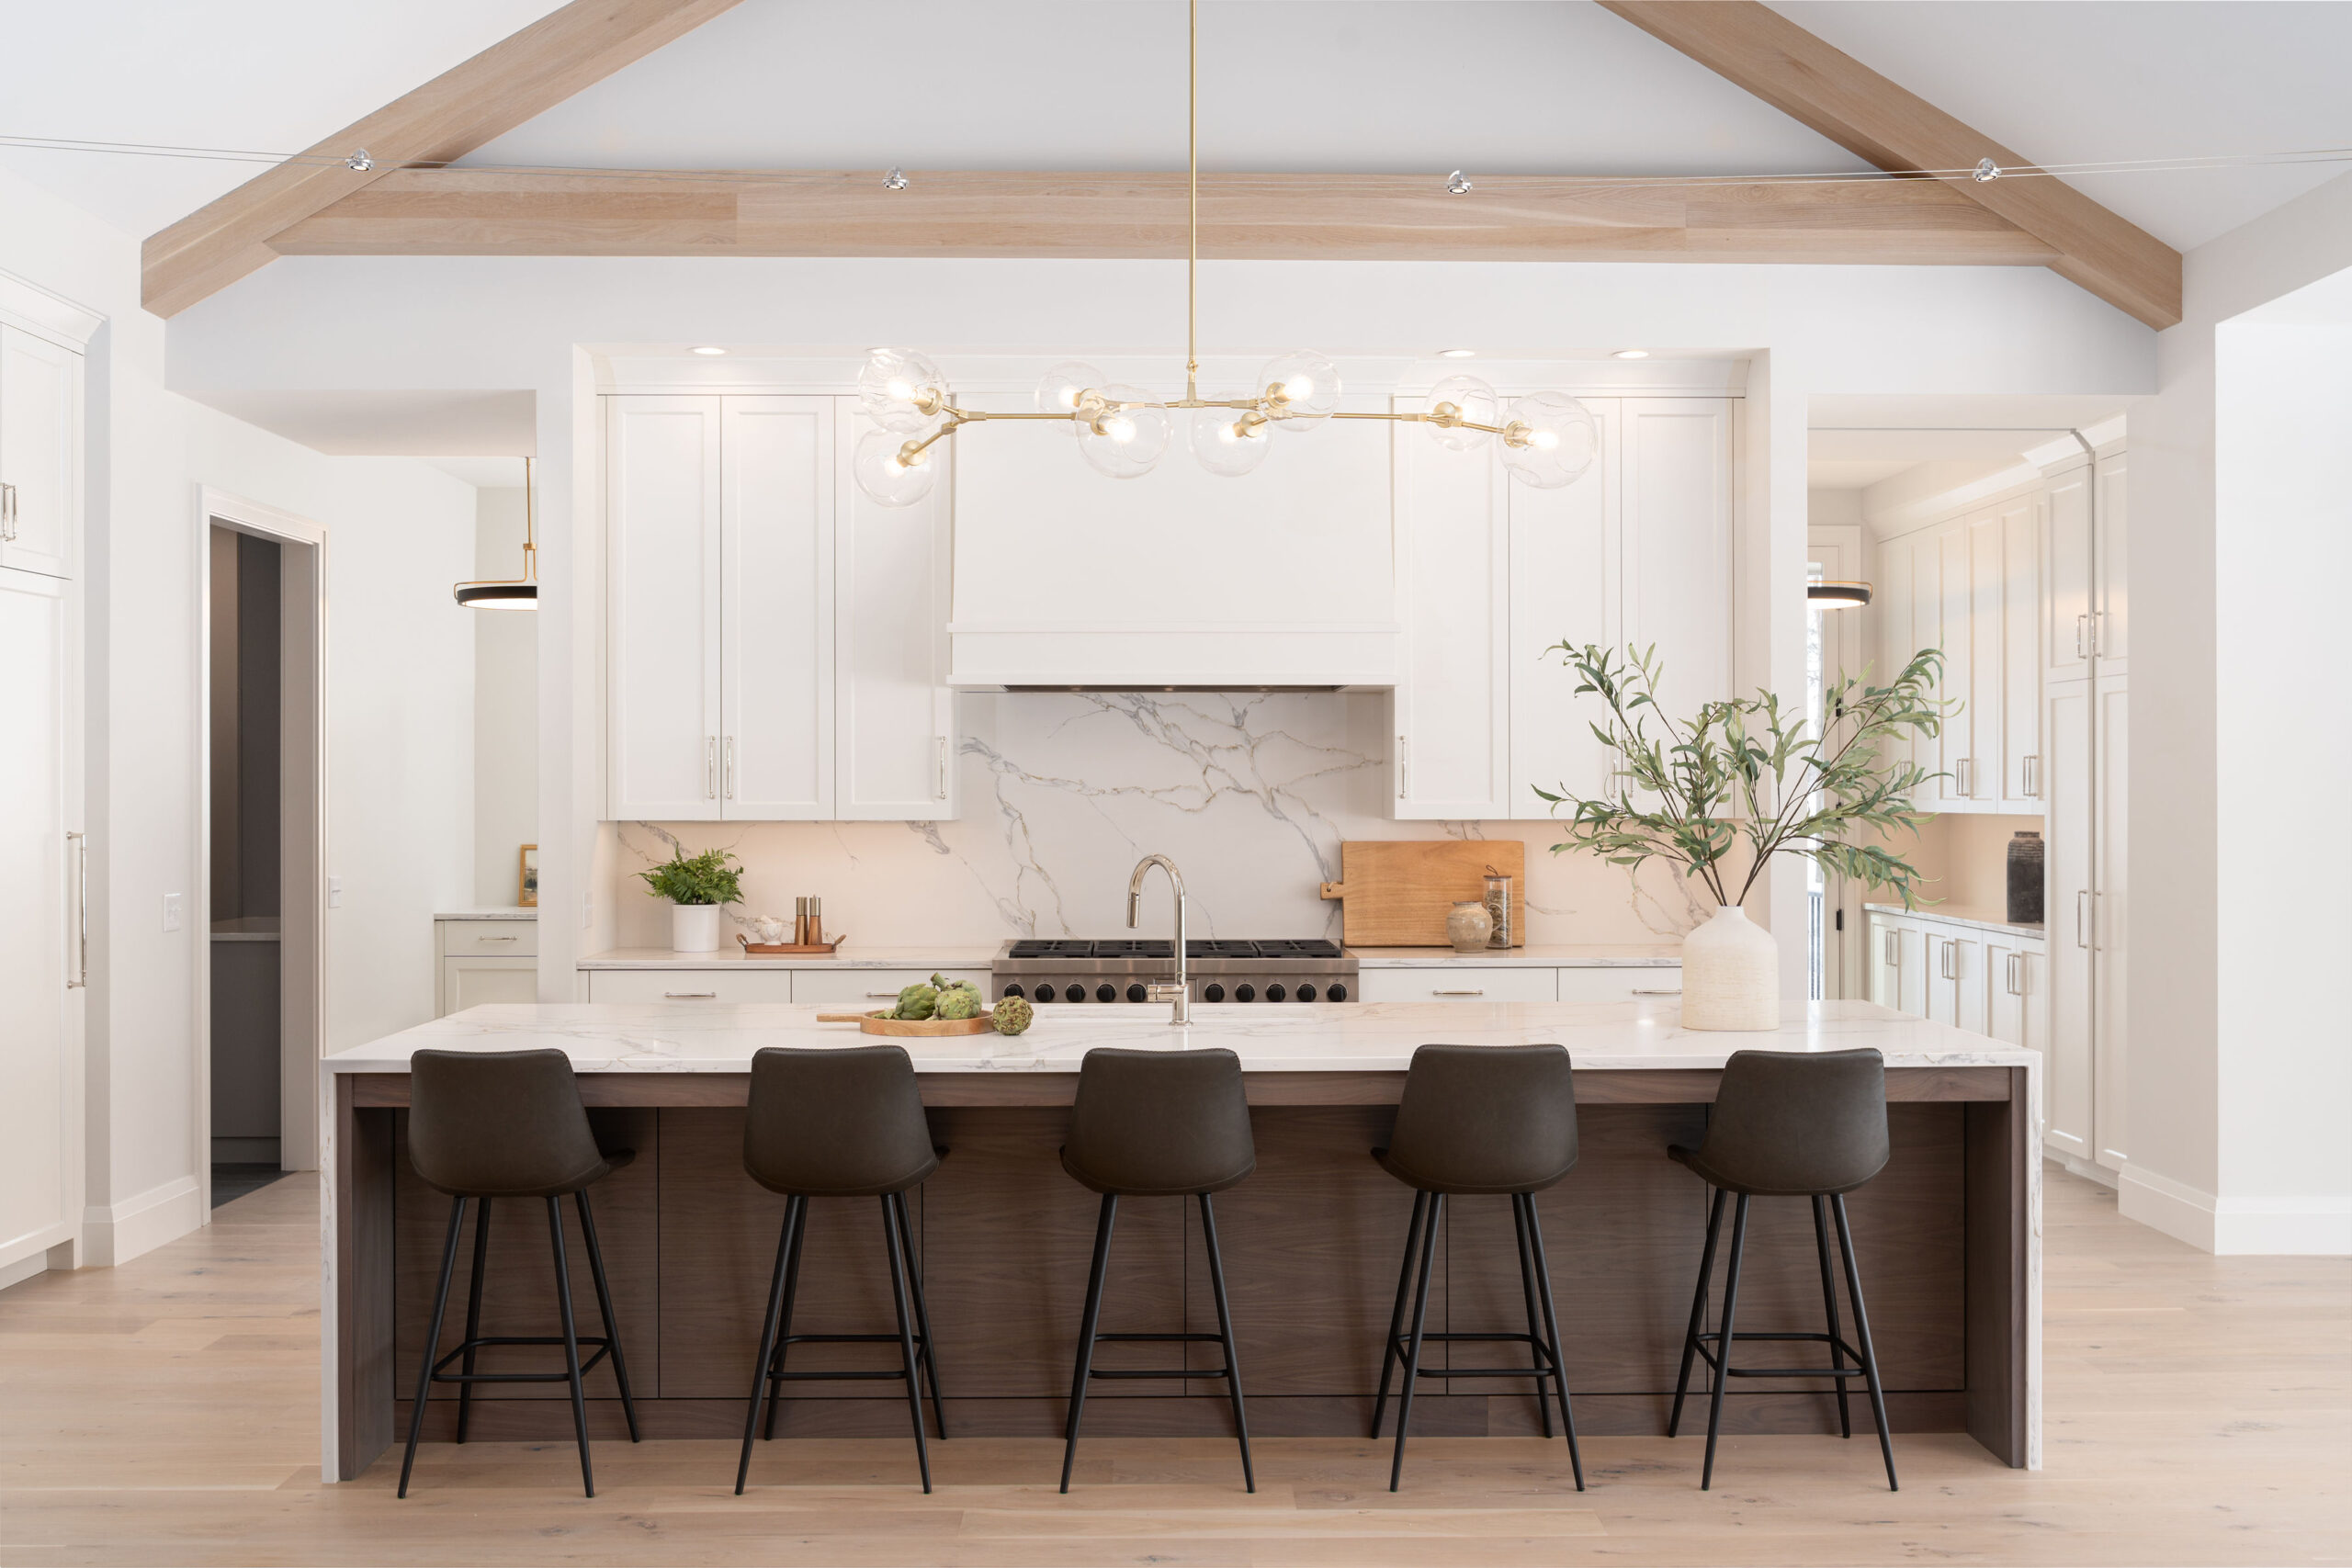 A white kitchen with wood beams and black stools.